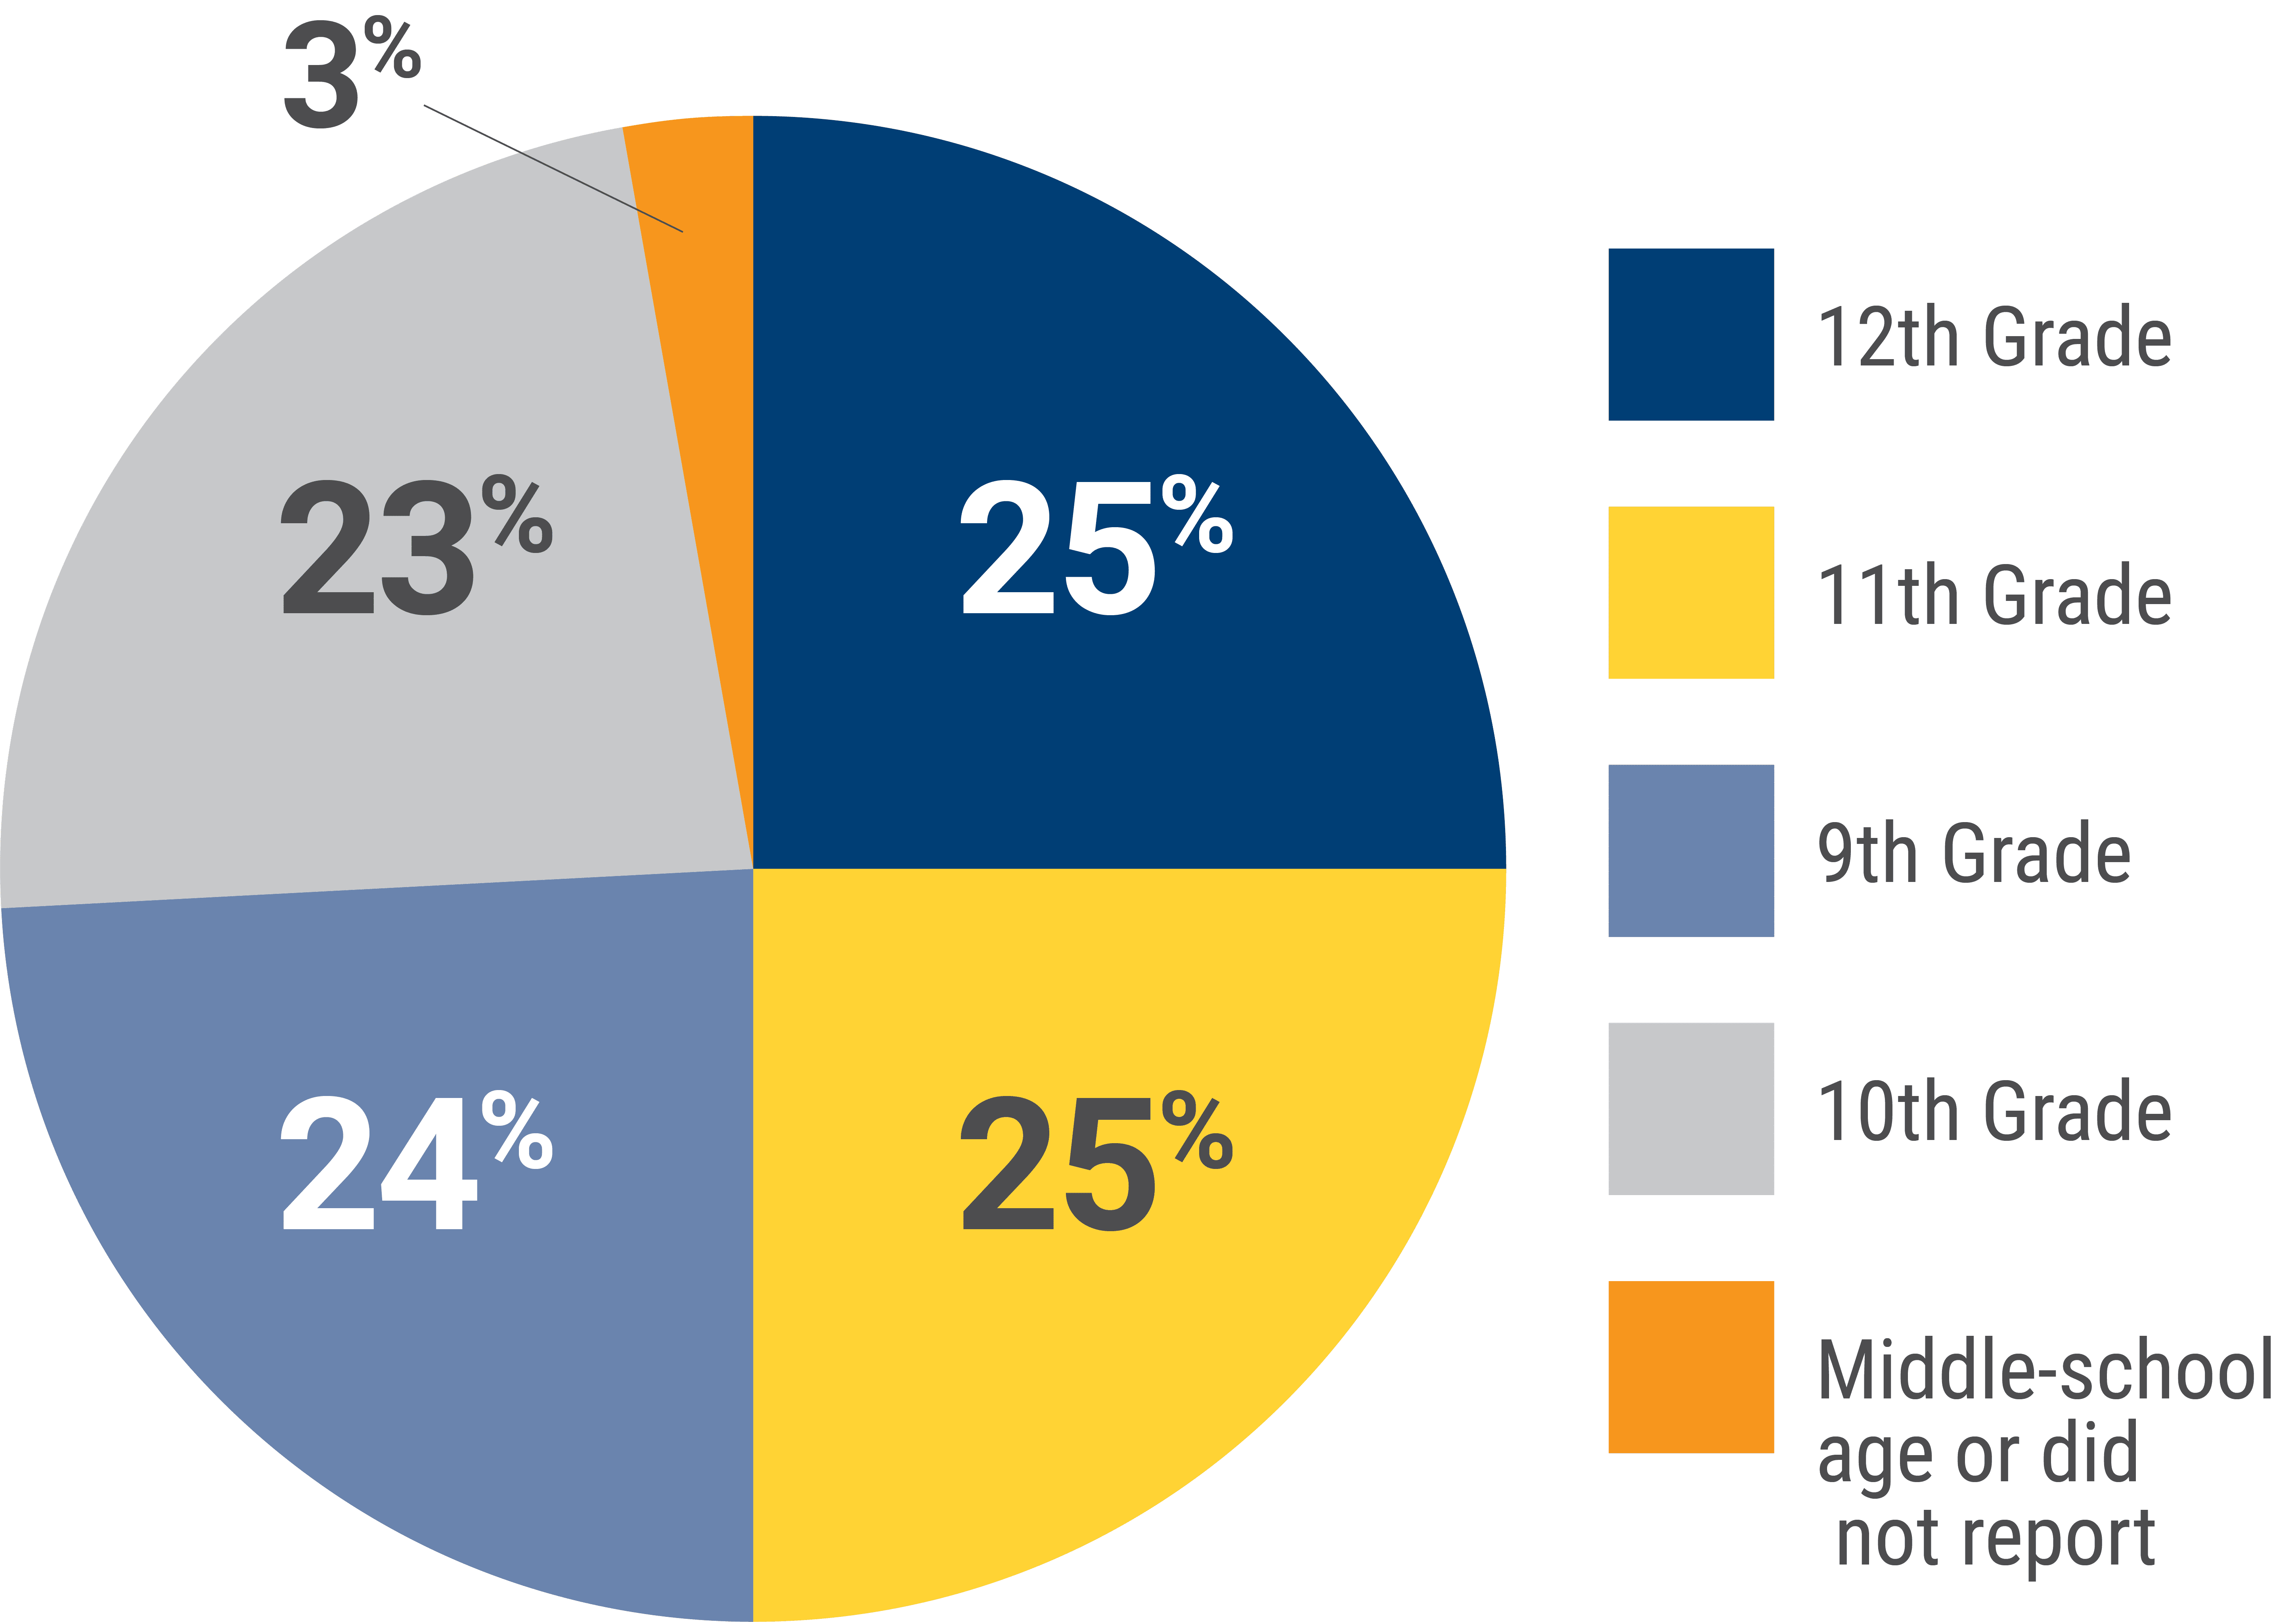 Pie chart shows percentage of parent/guardian respondents based on what grade their oldest child is in: 23% had a child in the 10th grade, 25% had a child in the 11th grade, 25% had a child in the 12th grade, 24% had a child in the 9th grade, and 3% either has a child in middle school or did not report